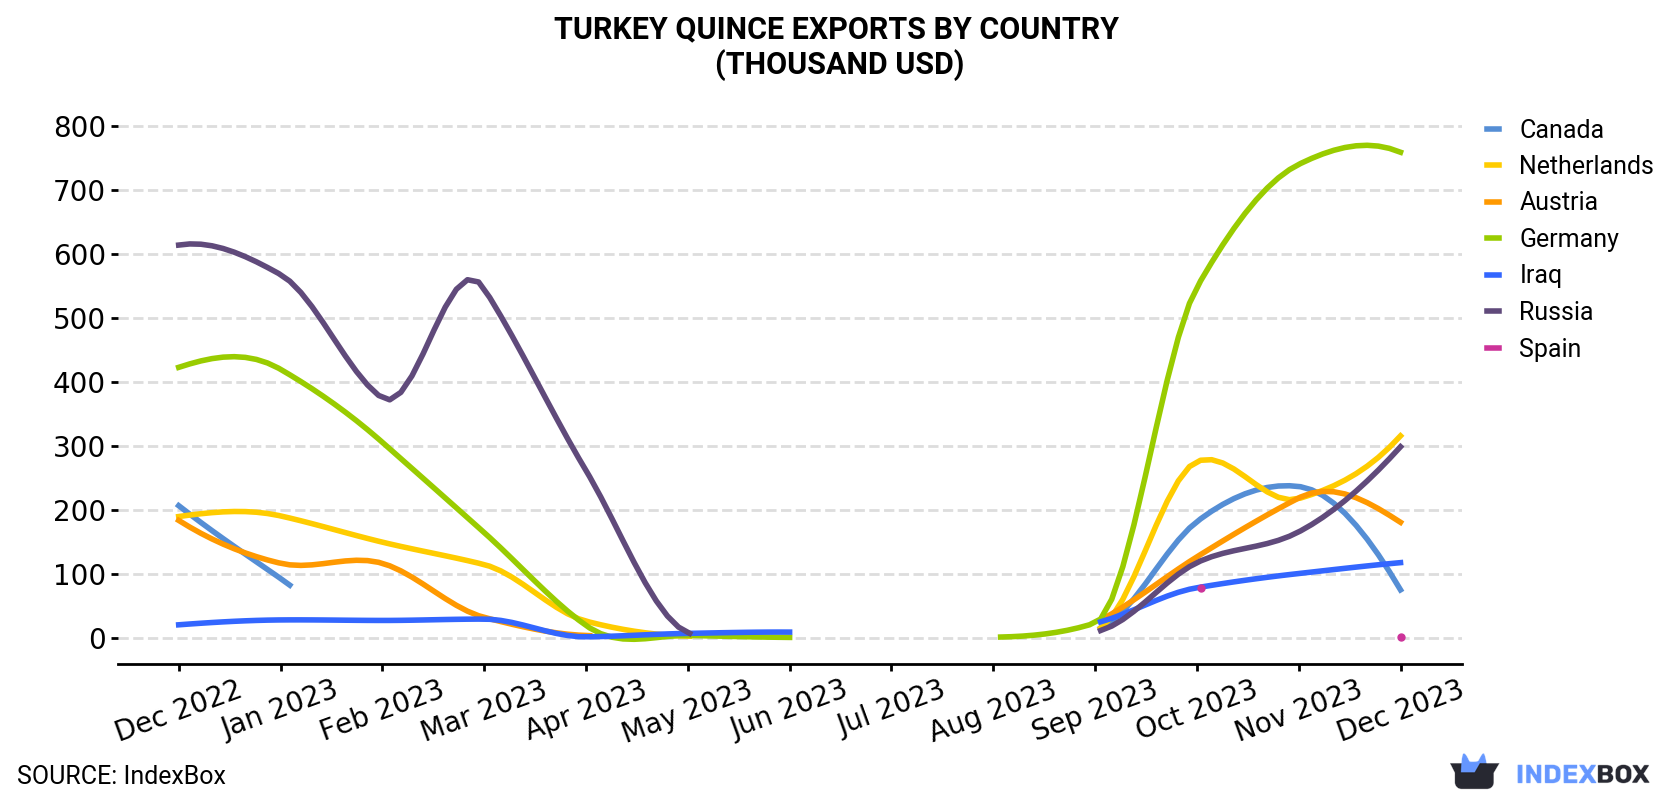 Turkey Quince Exports By Country (Thousand USD)